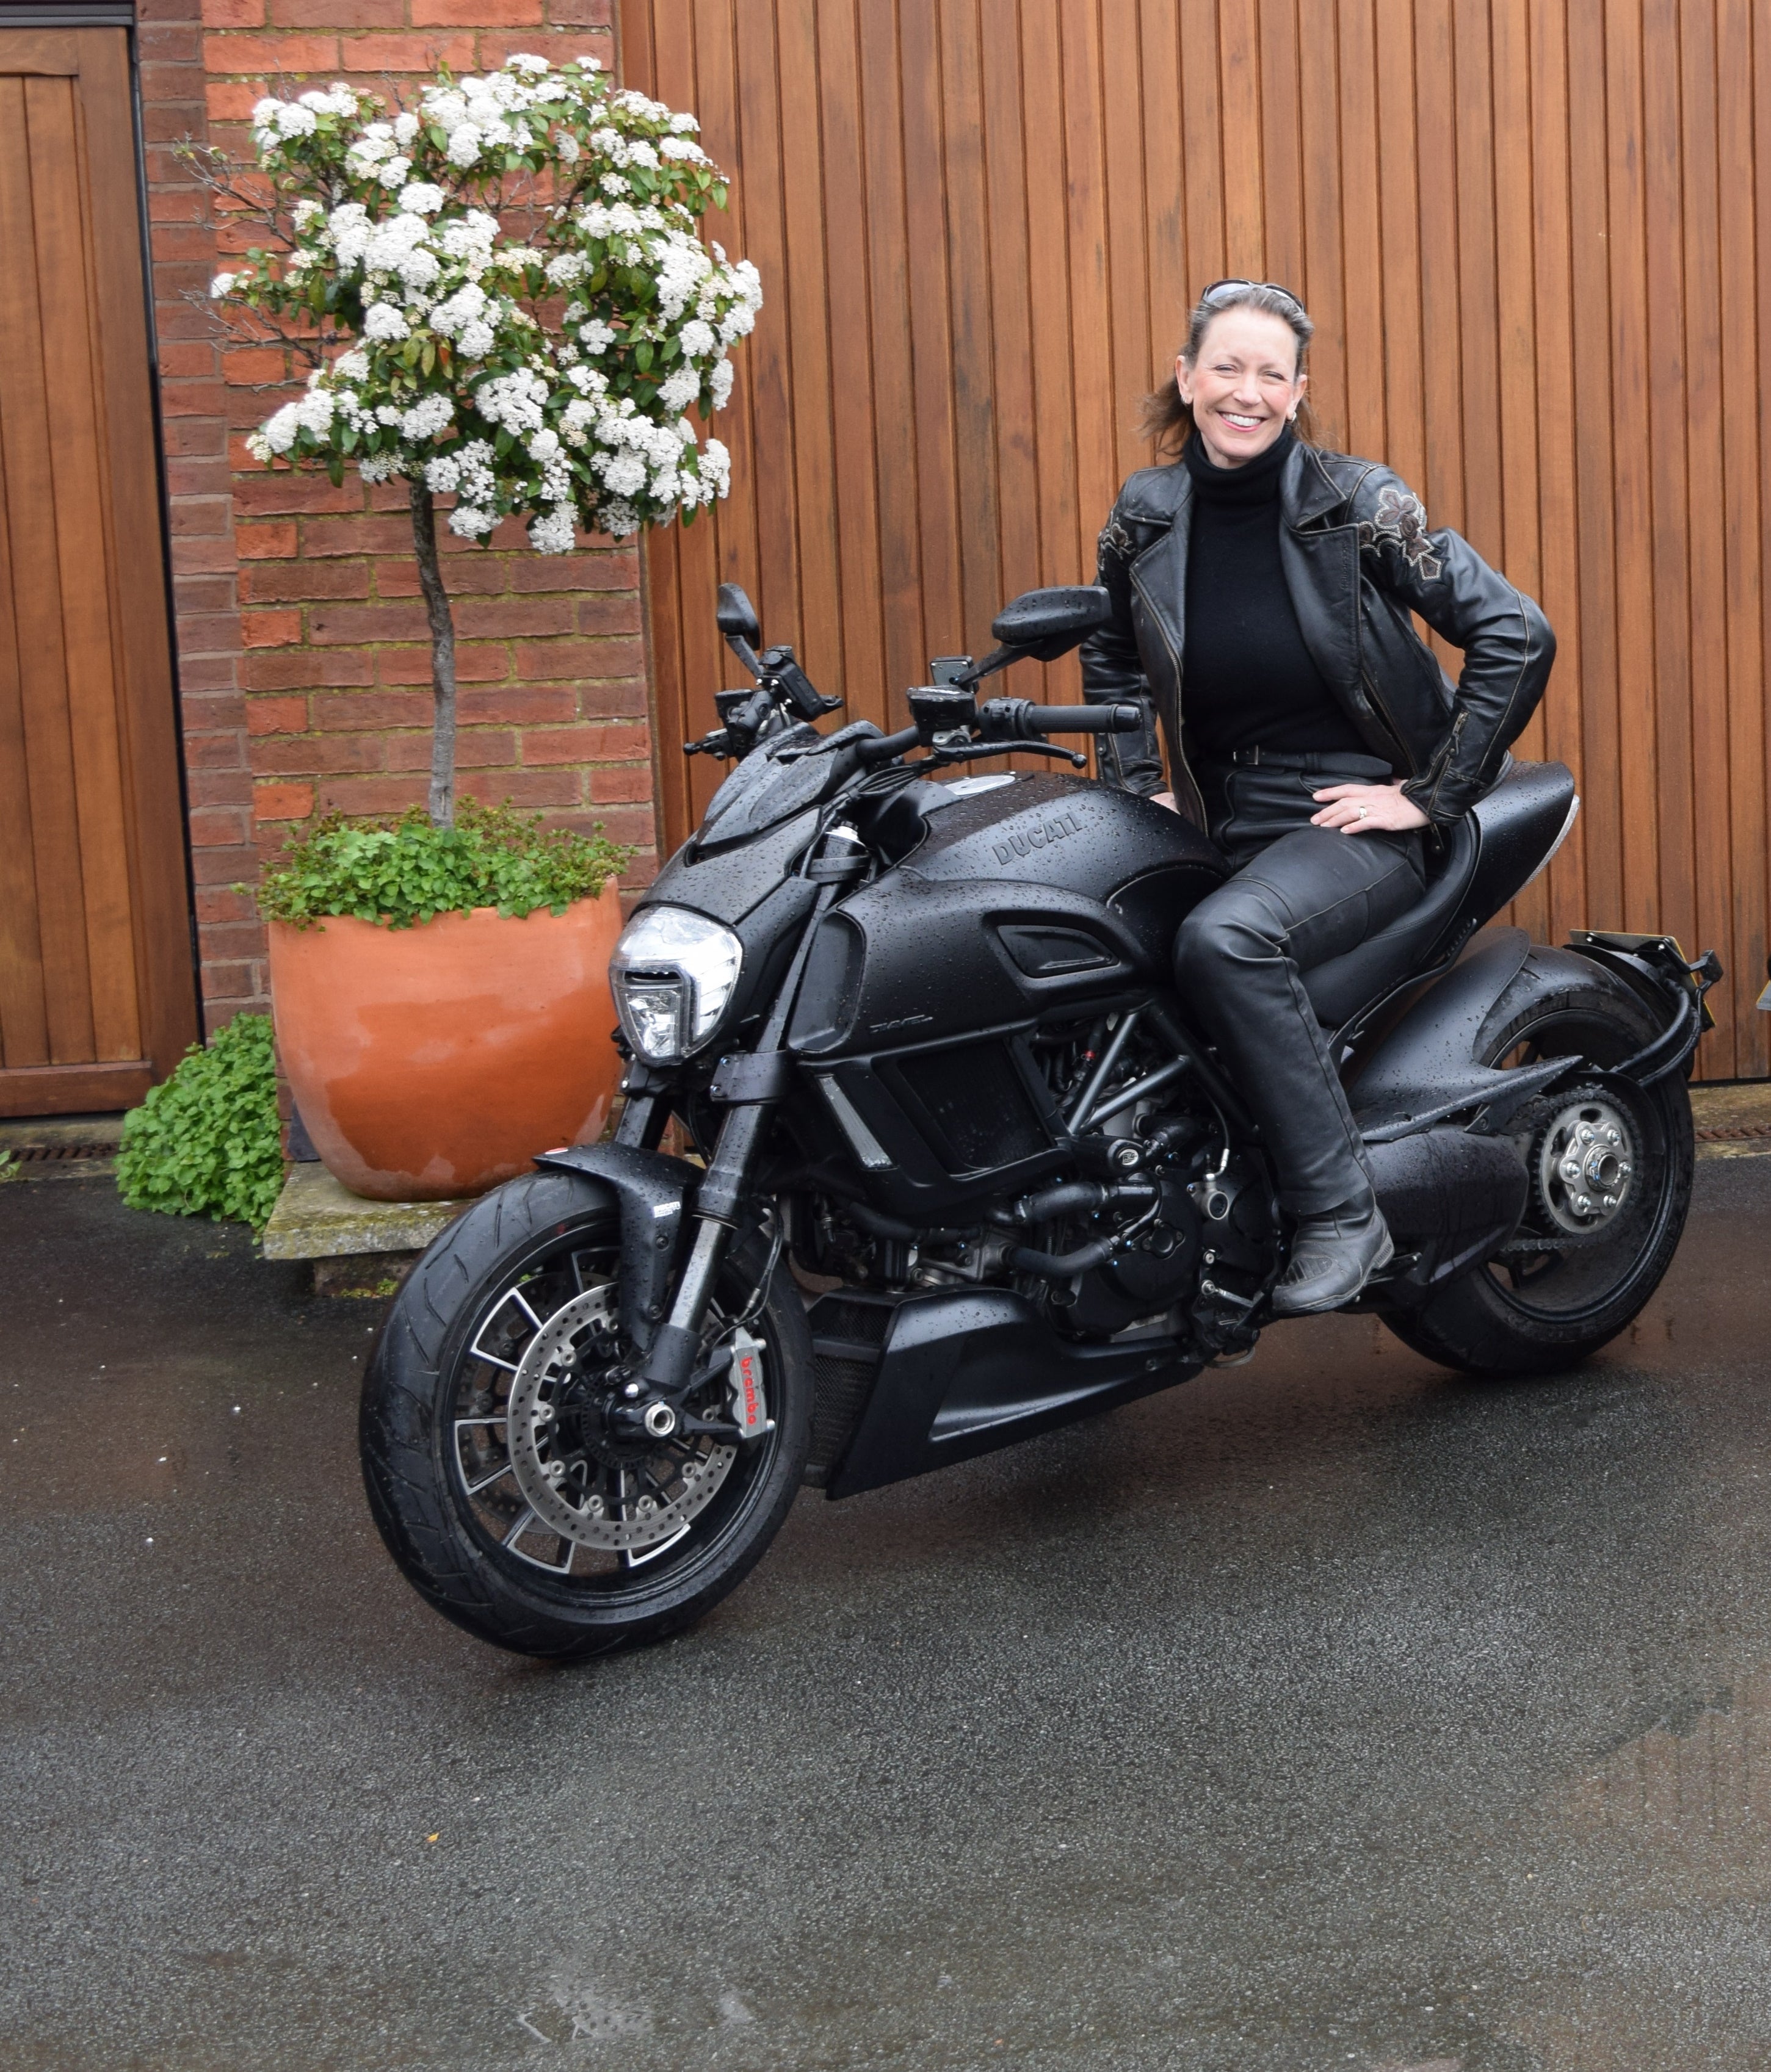 Frieda and her beloved Ducati Diavel – one of several motorbikes in her stable